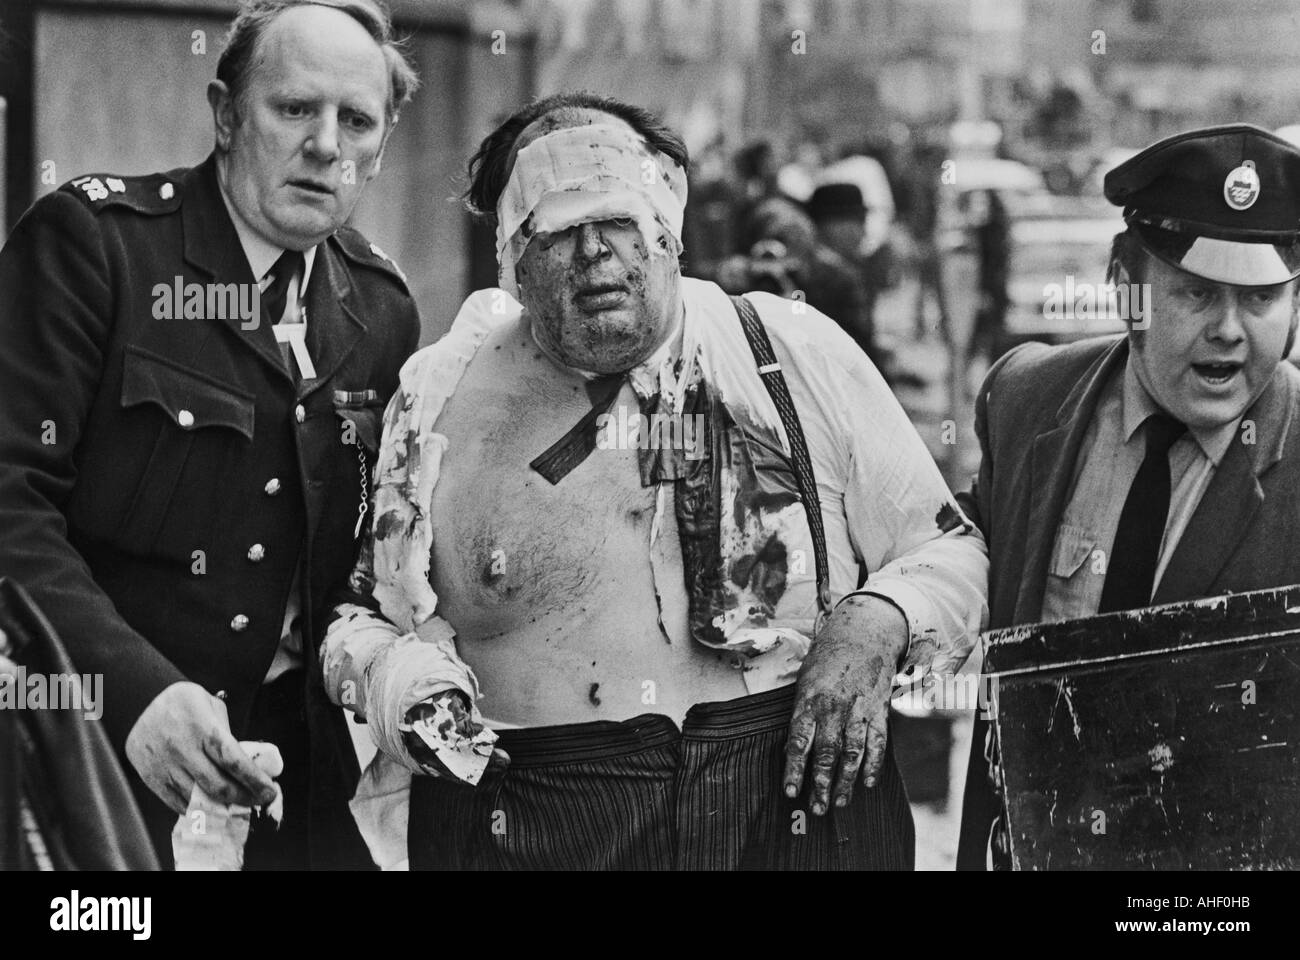 A barrister being helped to safety after the IRA bombed the Old Bailey on 8 March 1973 Stock Photo